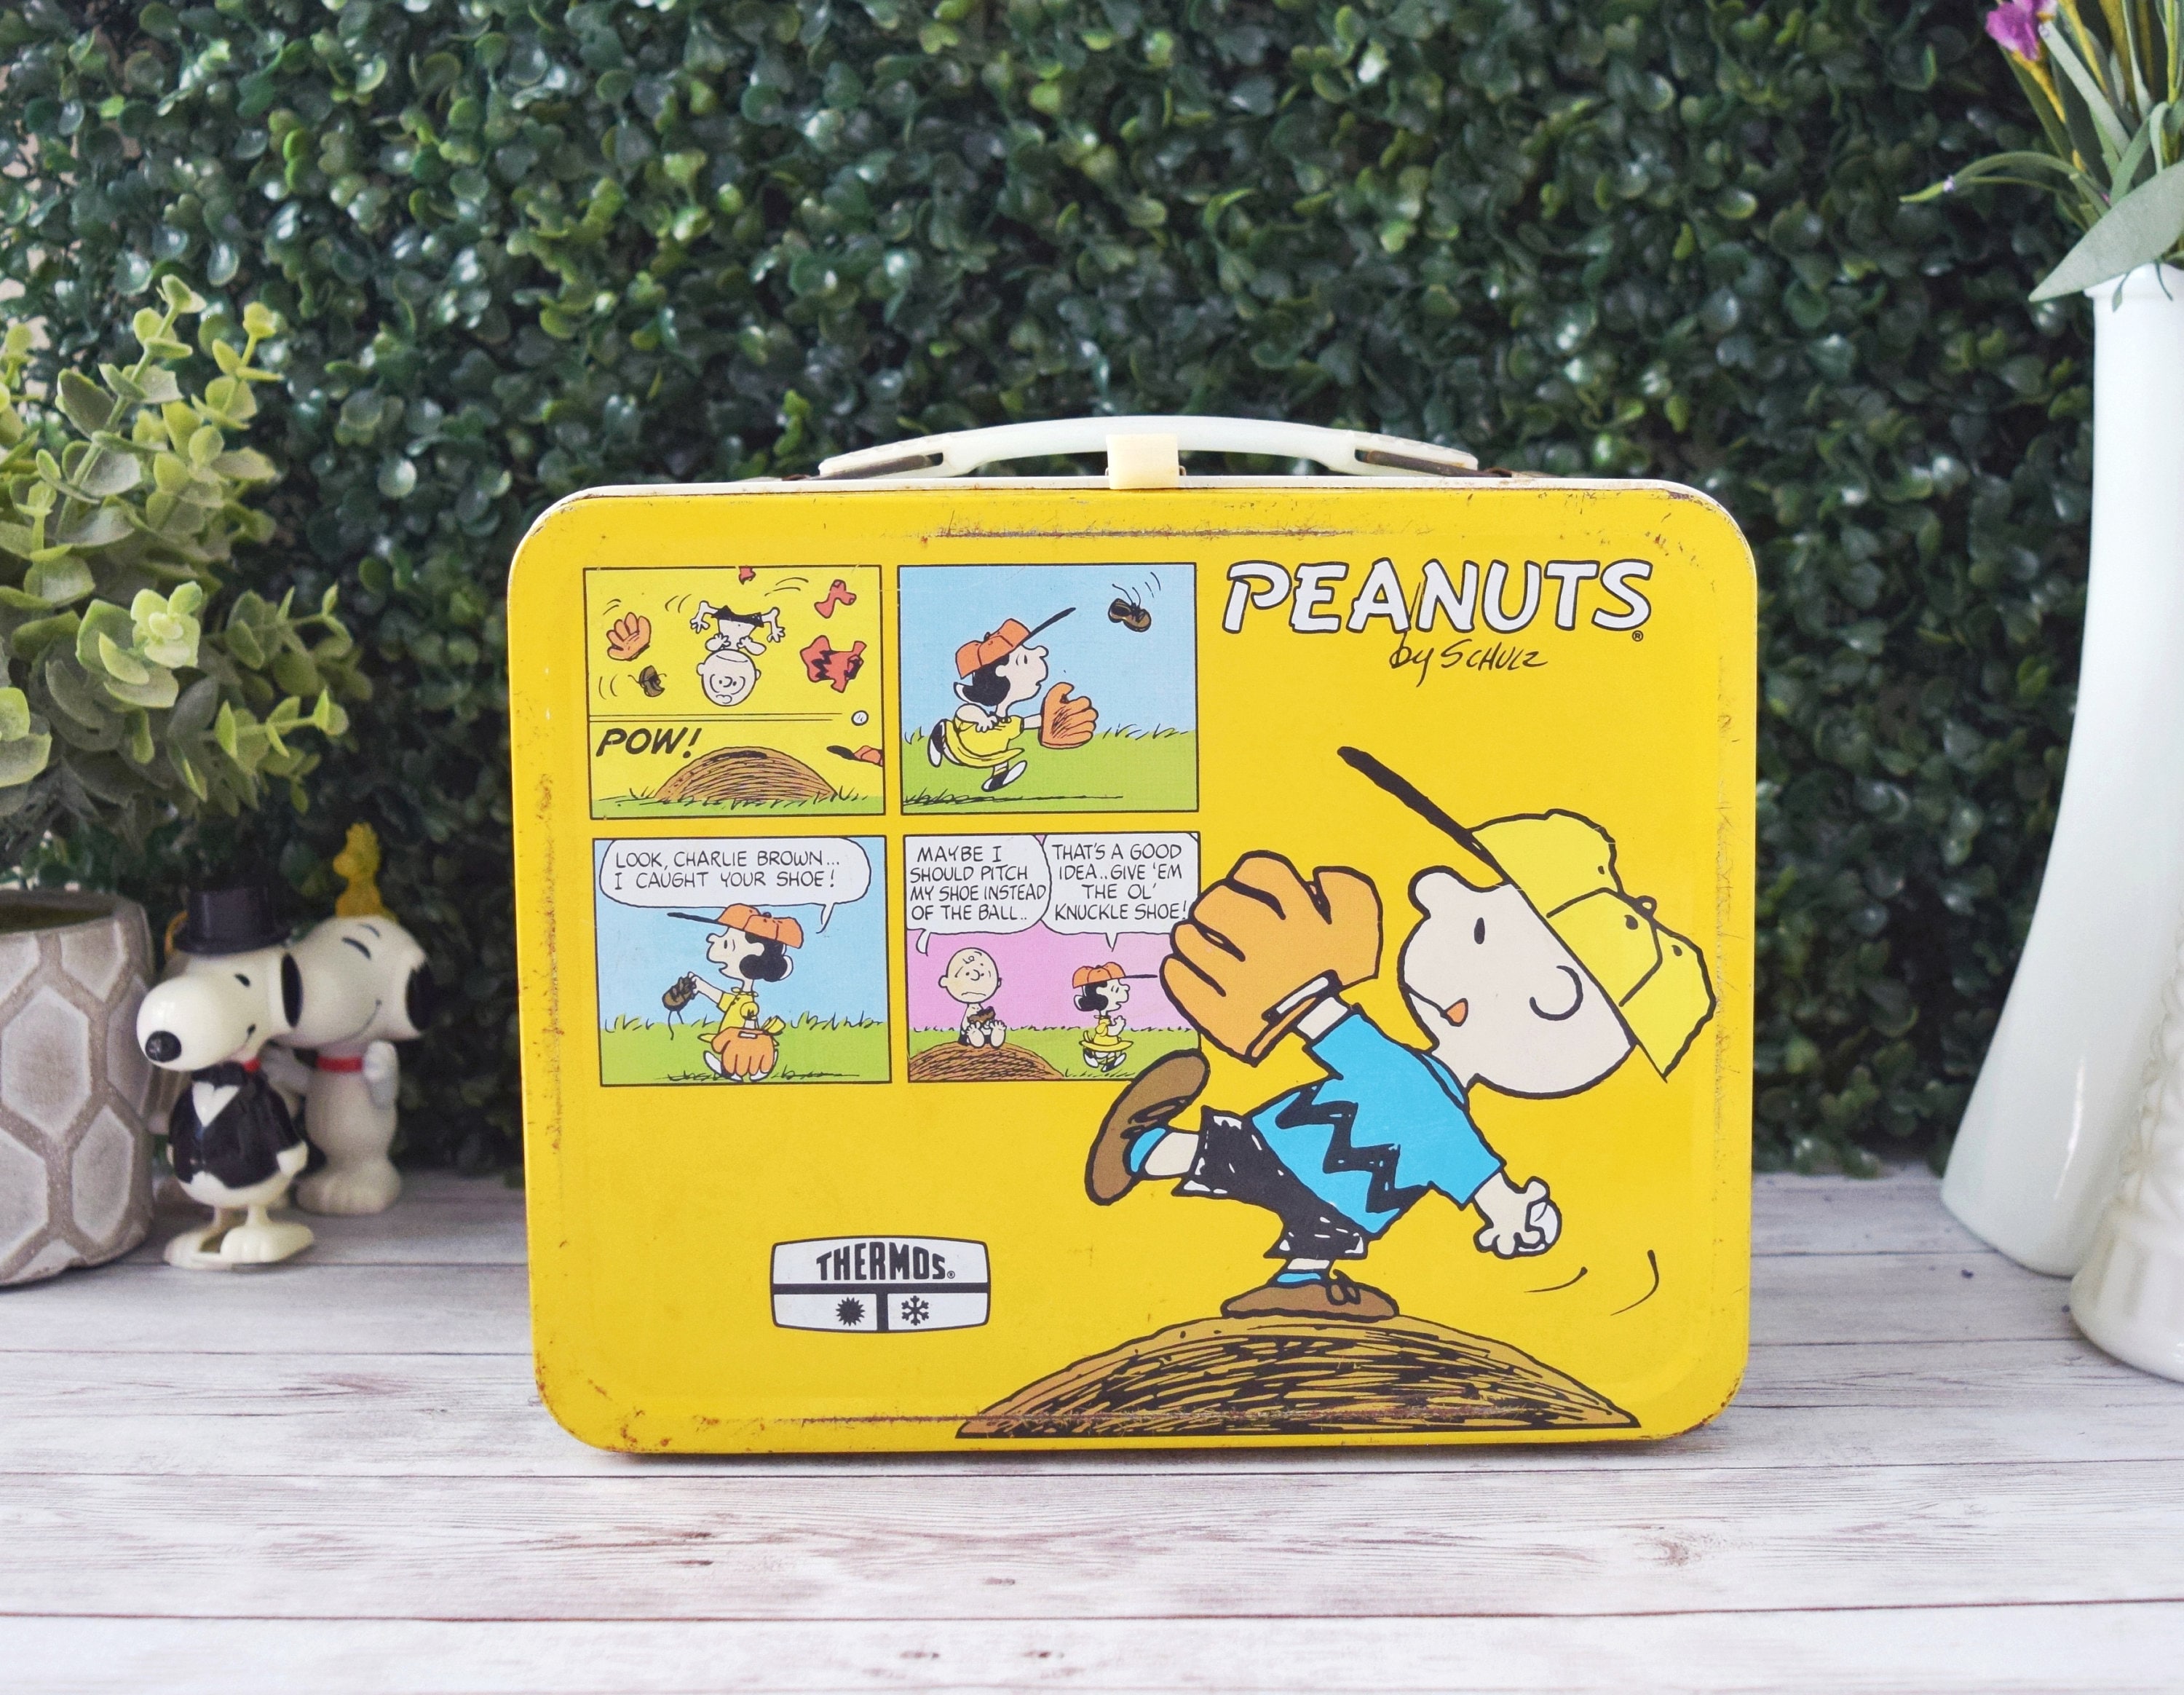 Peanuts Snoopy Vintage Lunch Box with Thermos & McDonald's Sheriff of  Cactus Canyon Lunch Box for Sale in Brea, CA - OfferUp